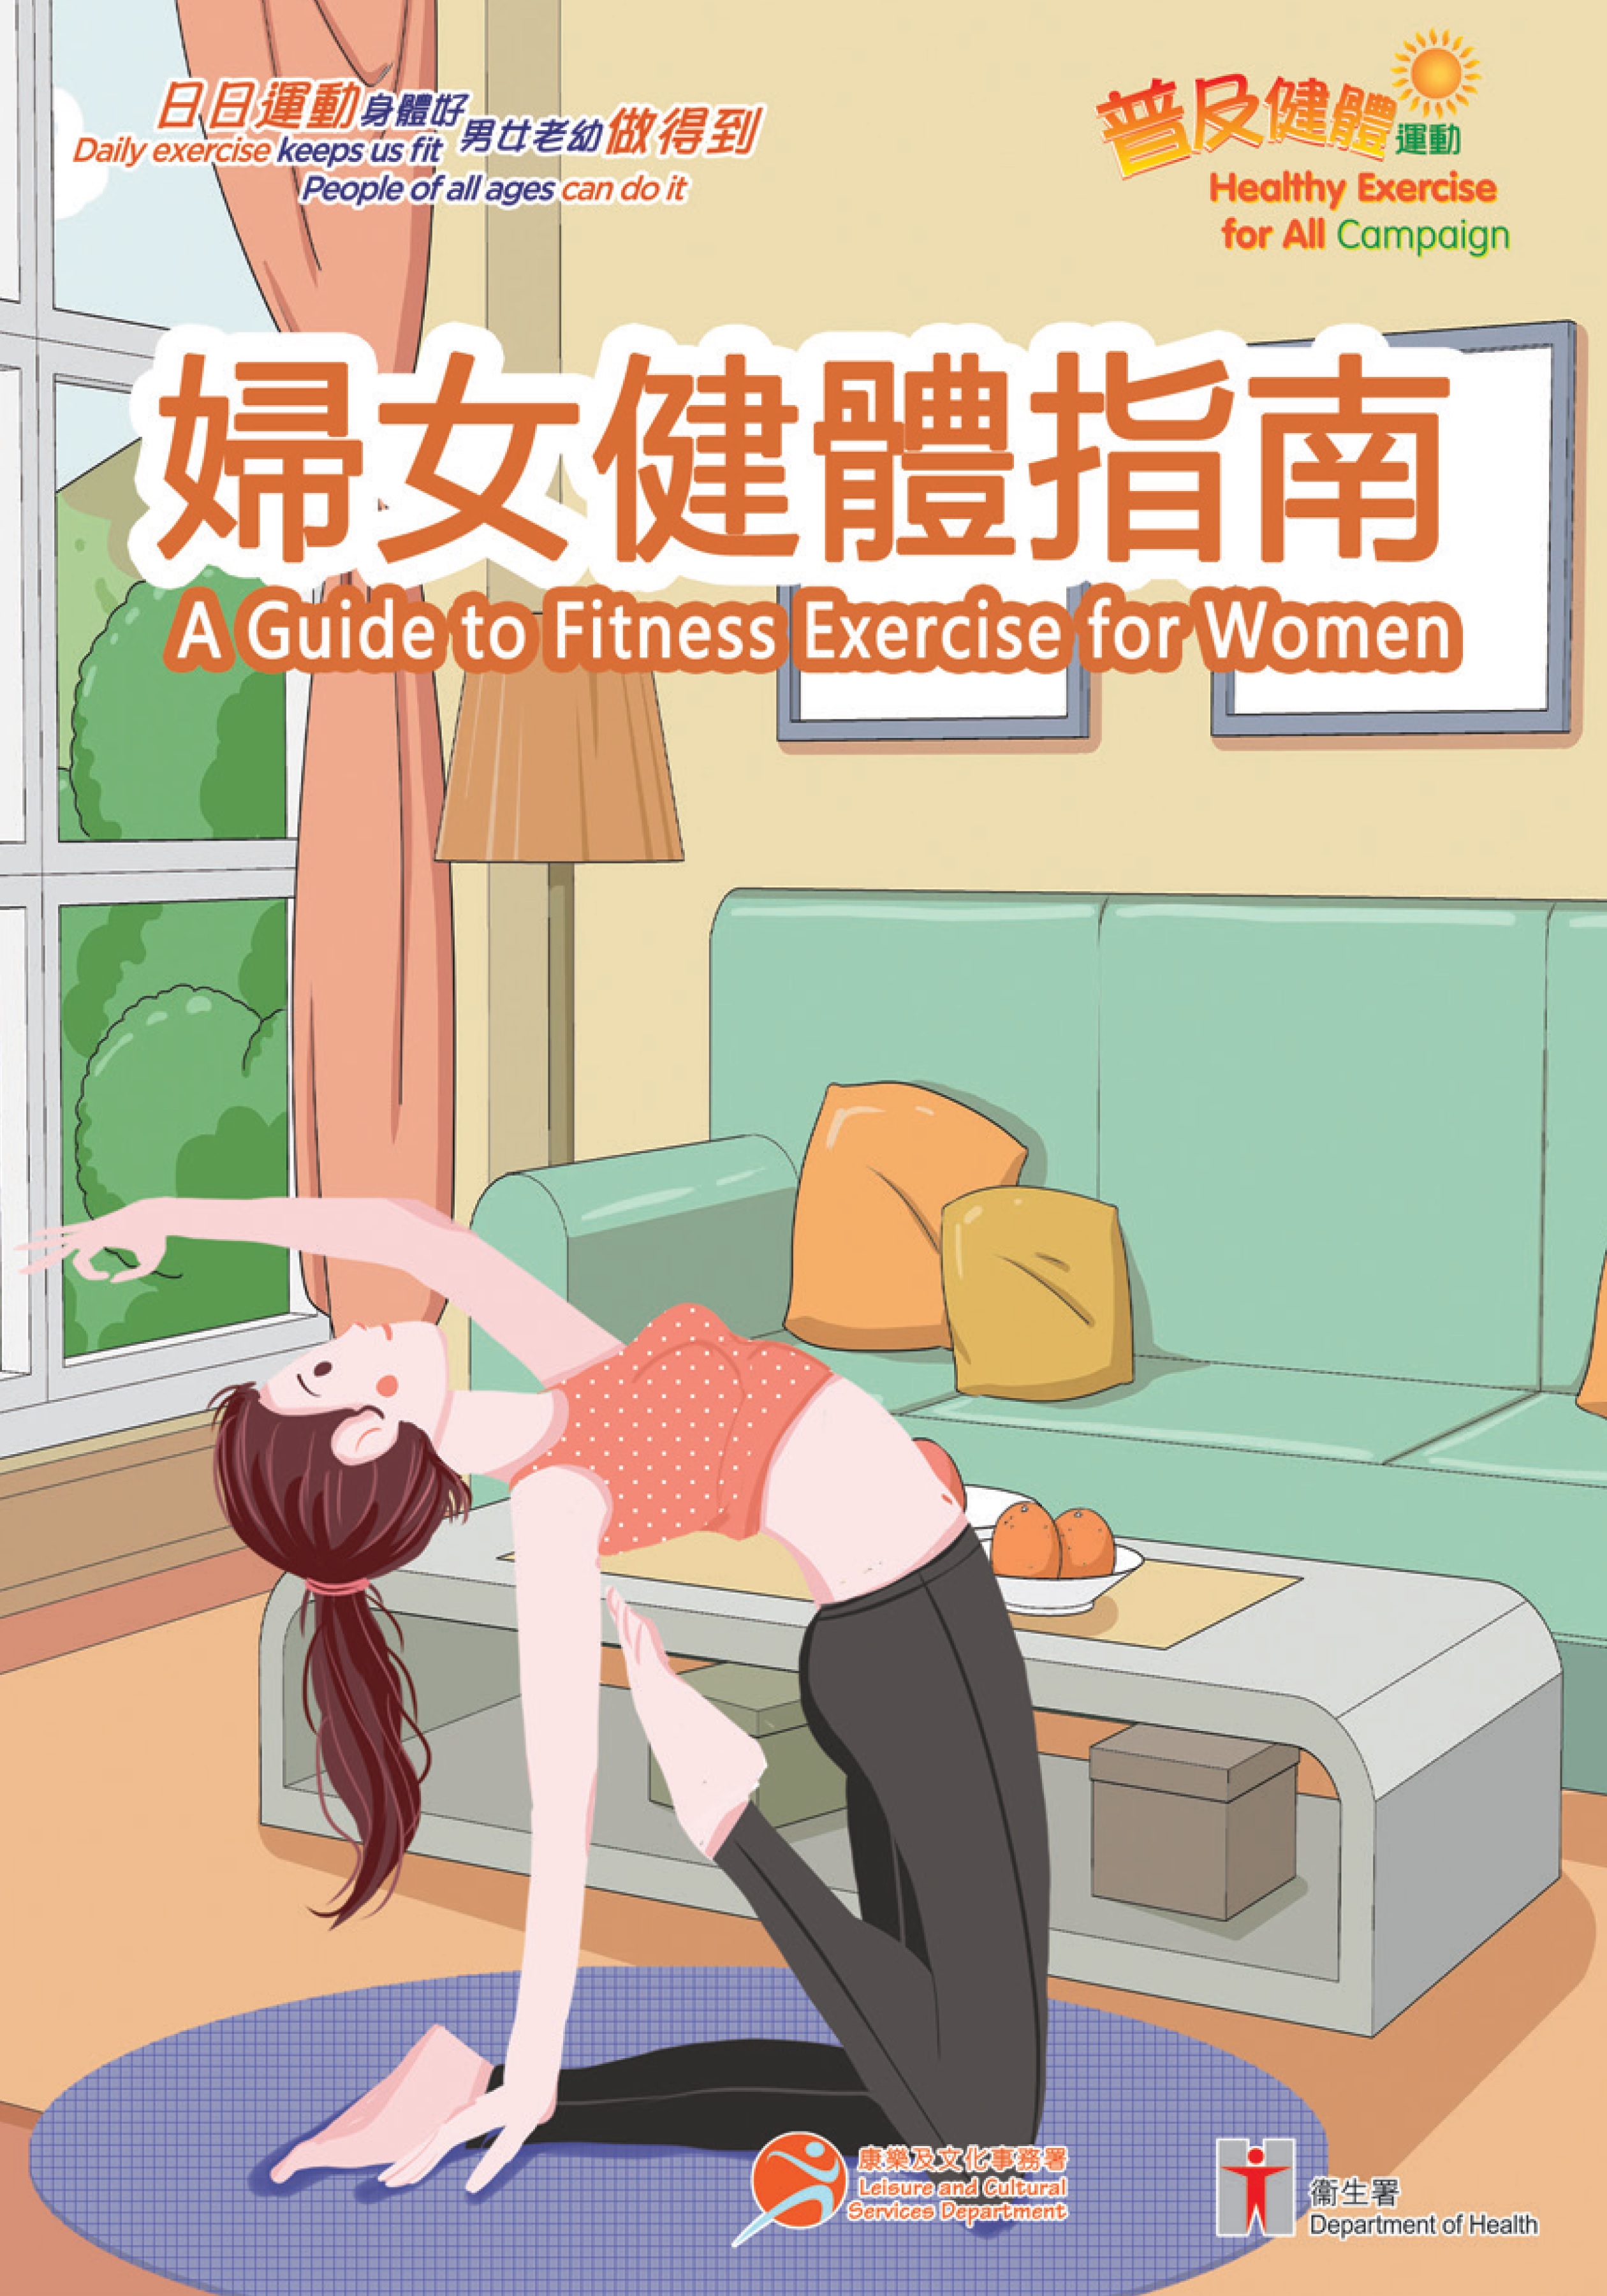 A Guide to Fitness Exercise for Women